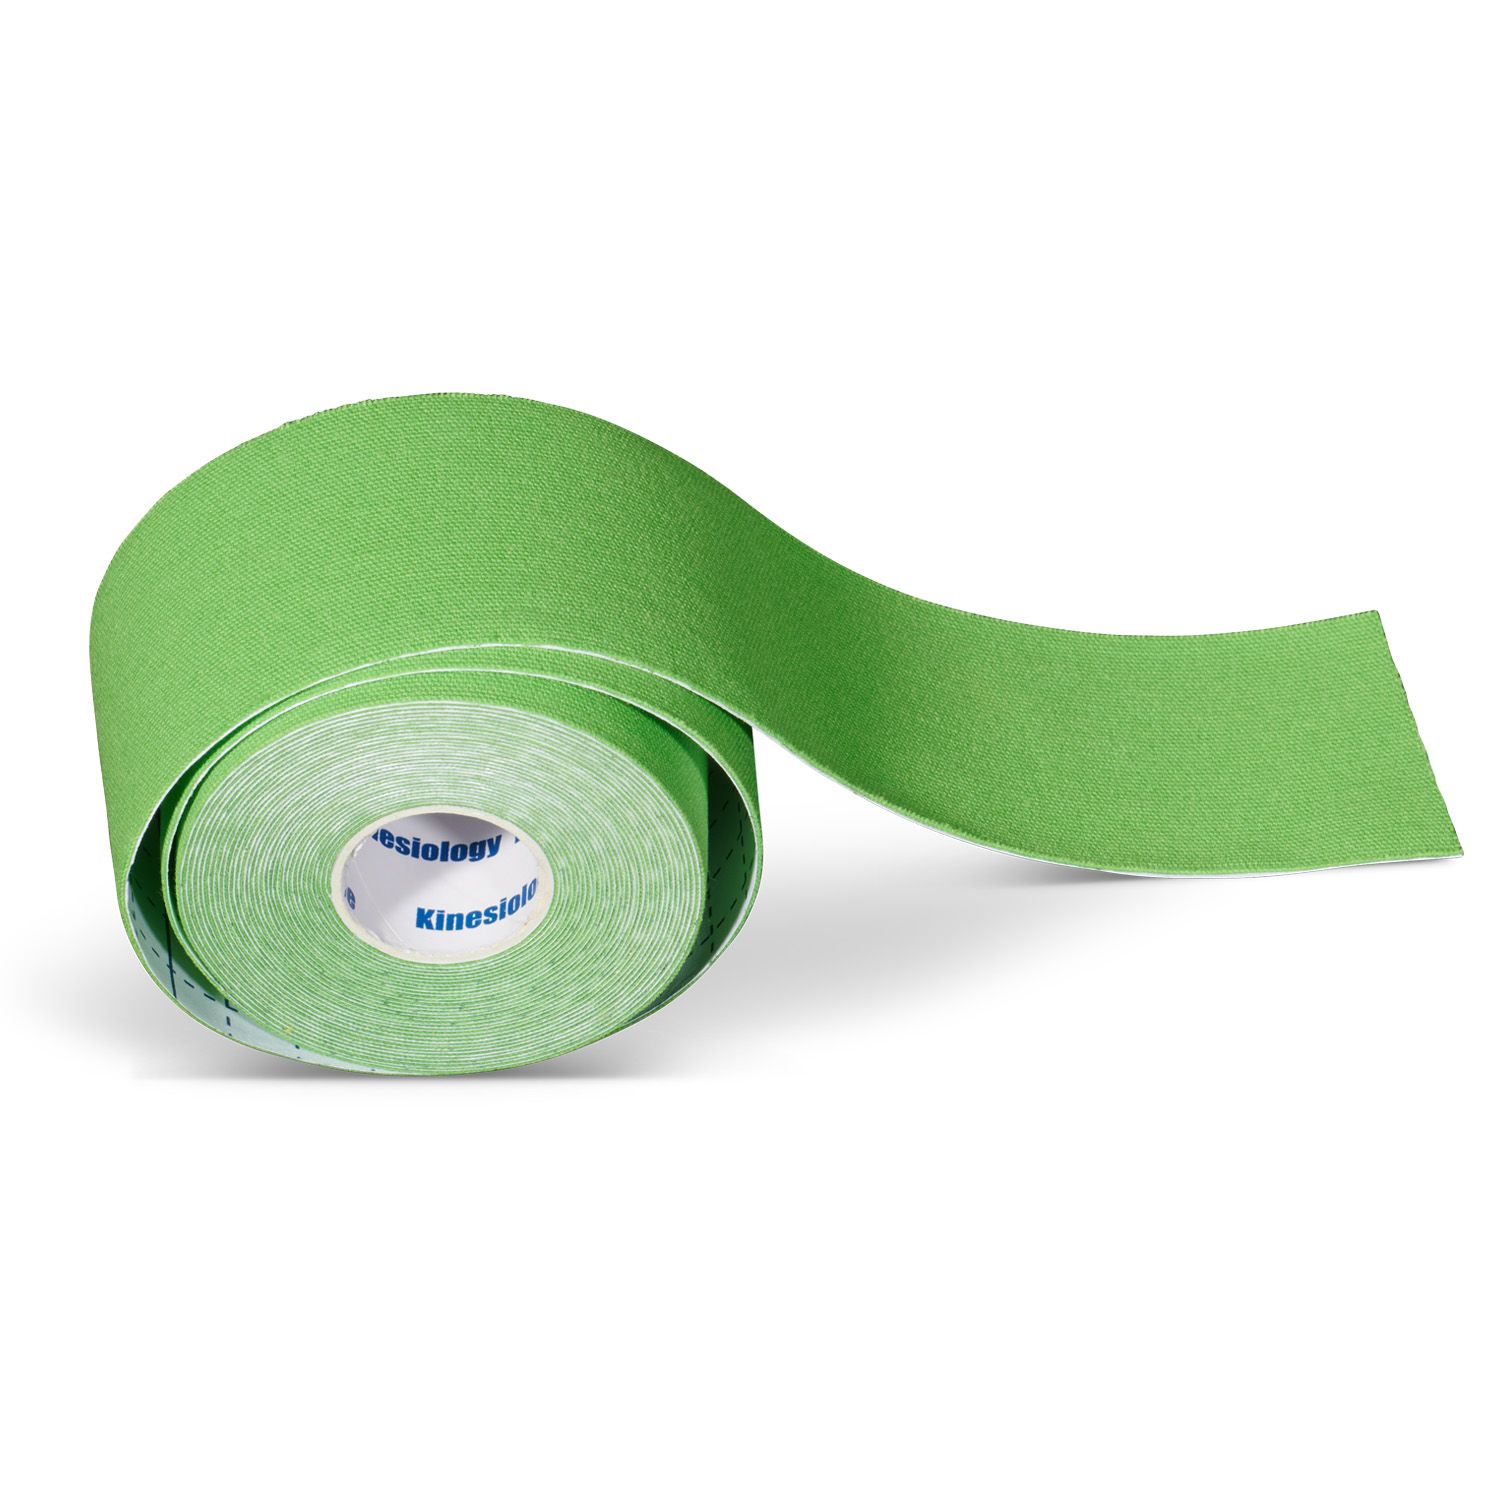 Kinesiology tape 12 rolls plus 3 rolls for free green